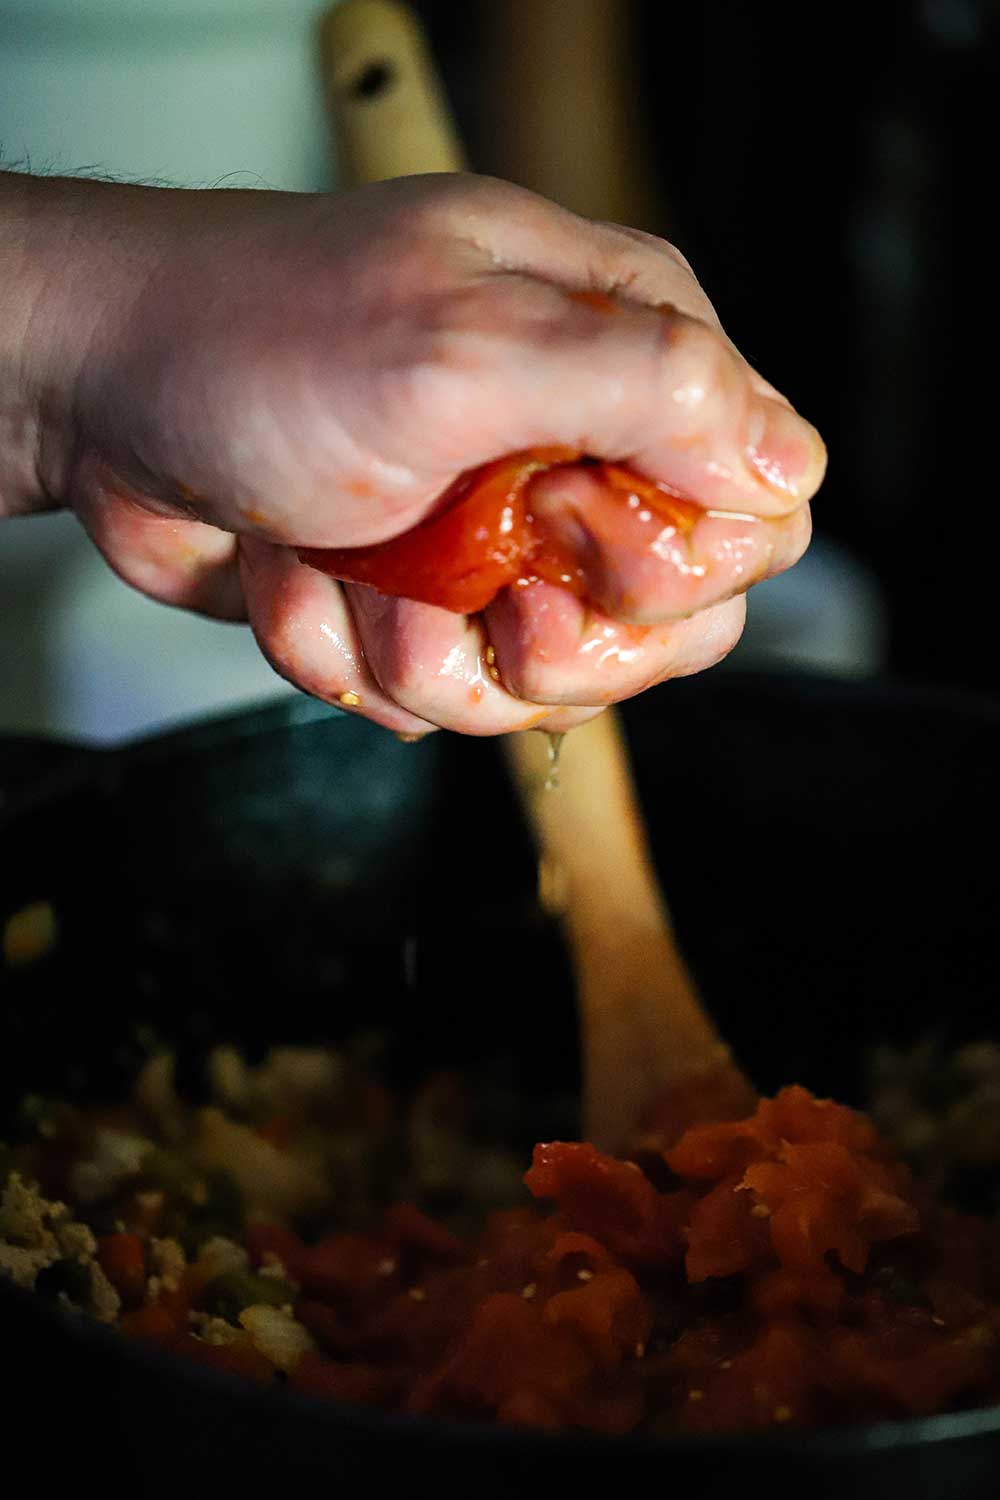 A hand squeezing a whole tomato over a cast-iron pot full of cooked ground turkey and vegetables.